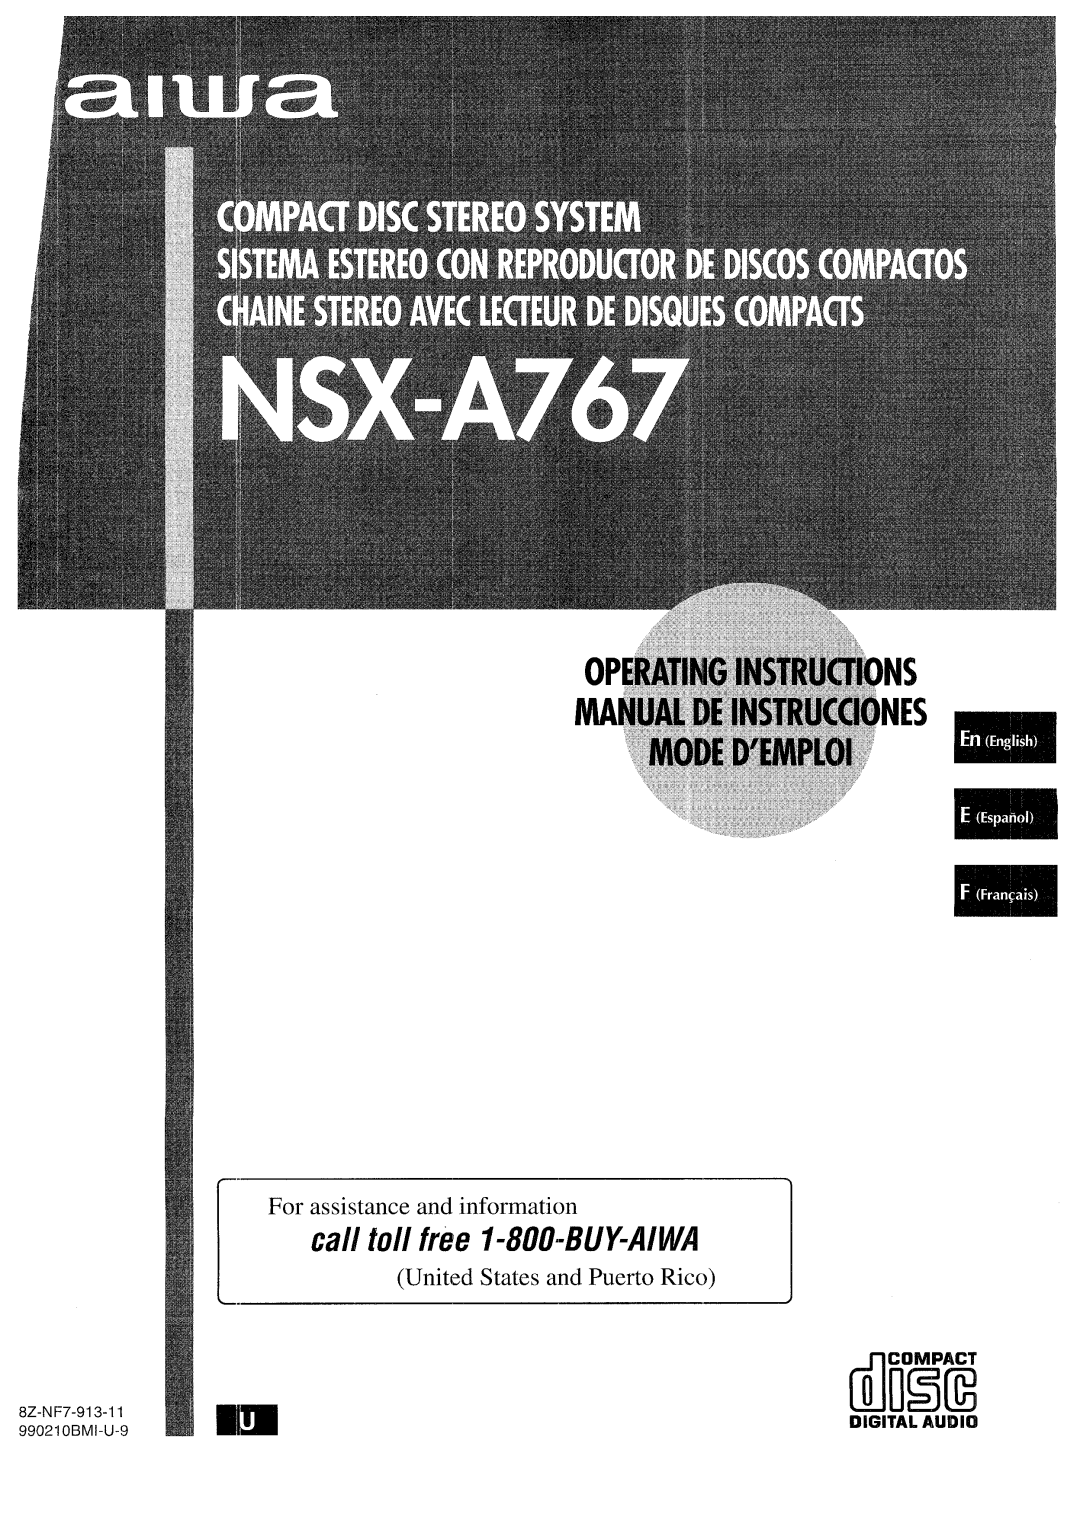 Sony NSX-A767 manual For assistance and information, United States and Puerto Rico, Digital Audio 